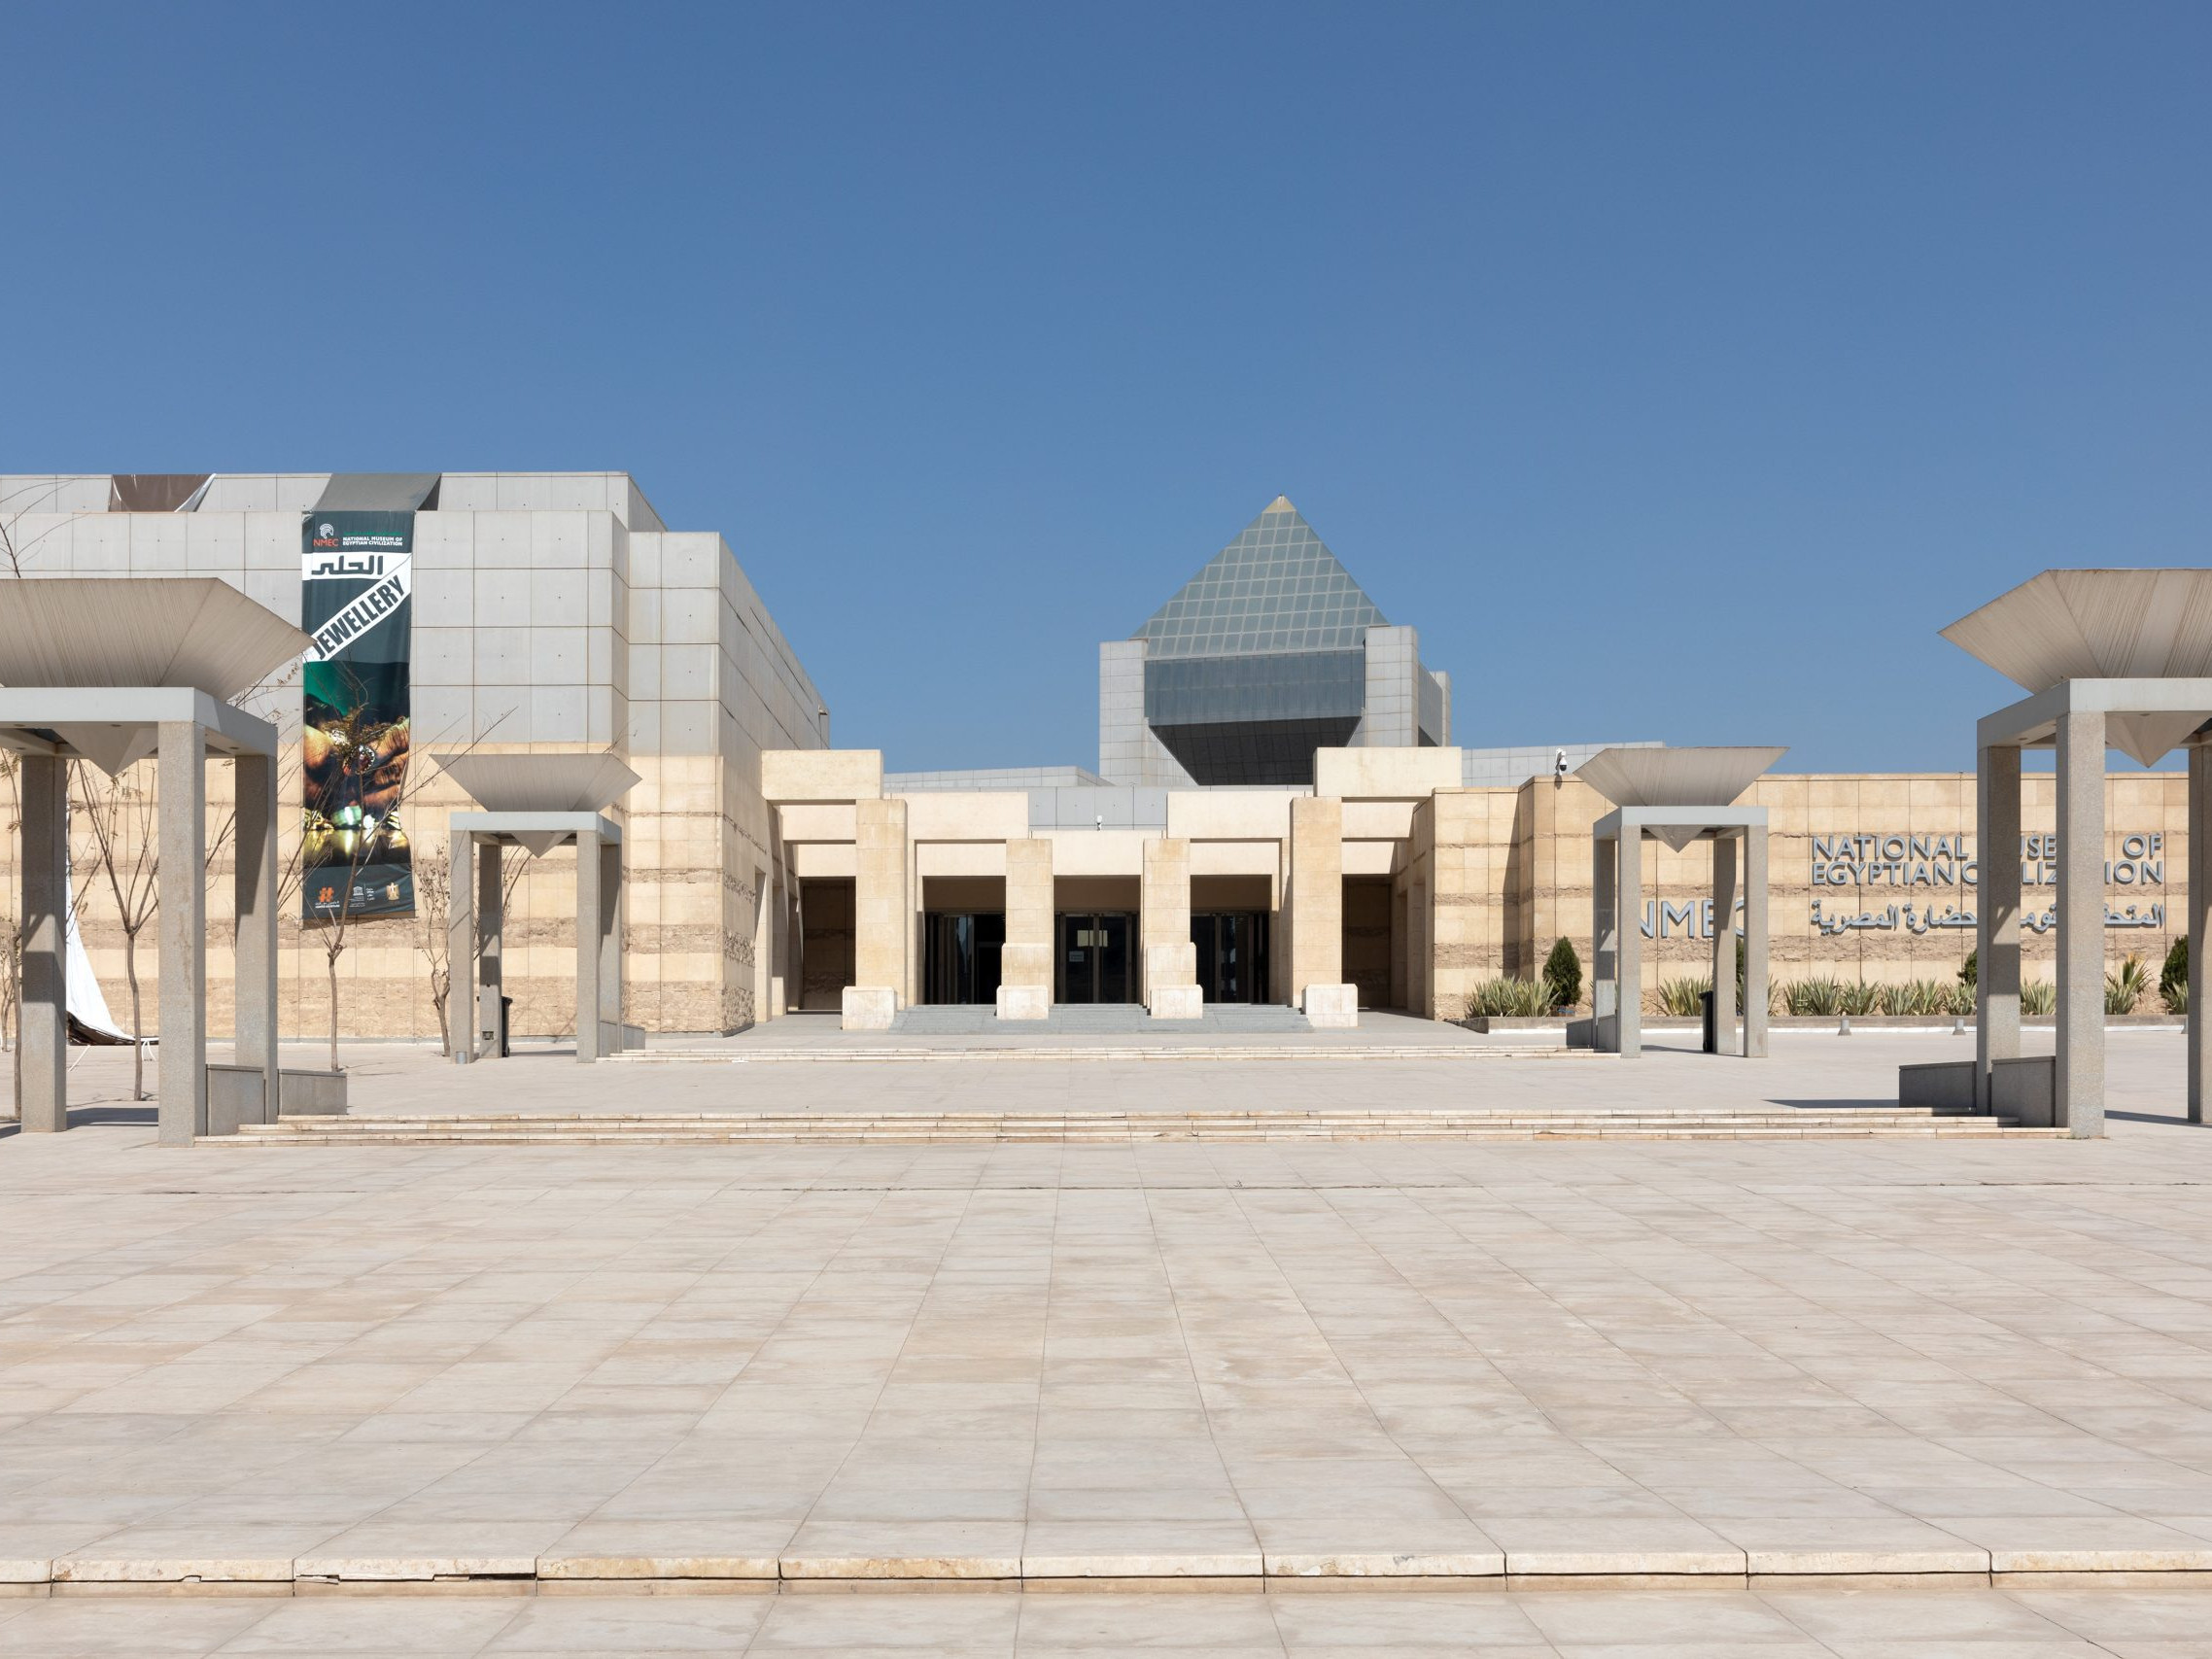 National museum of egyptian civilization